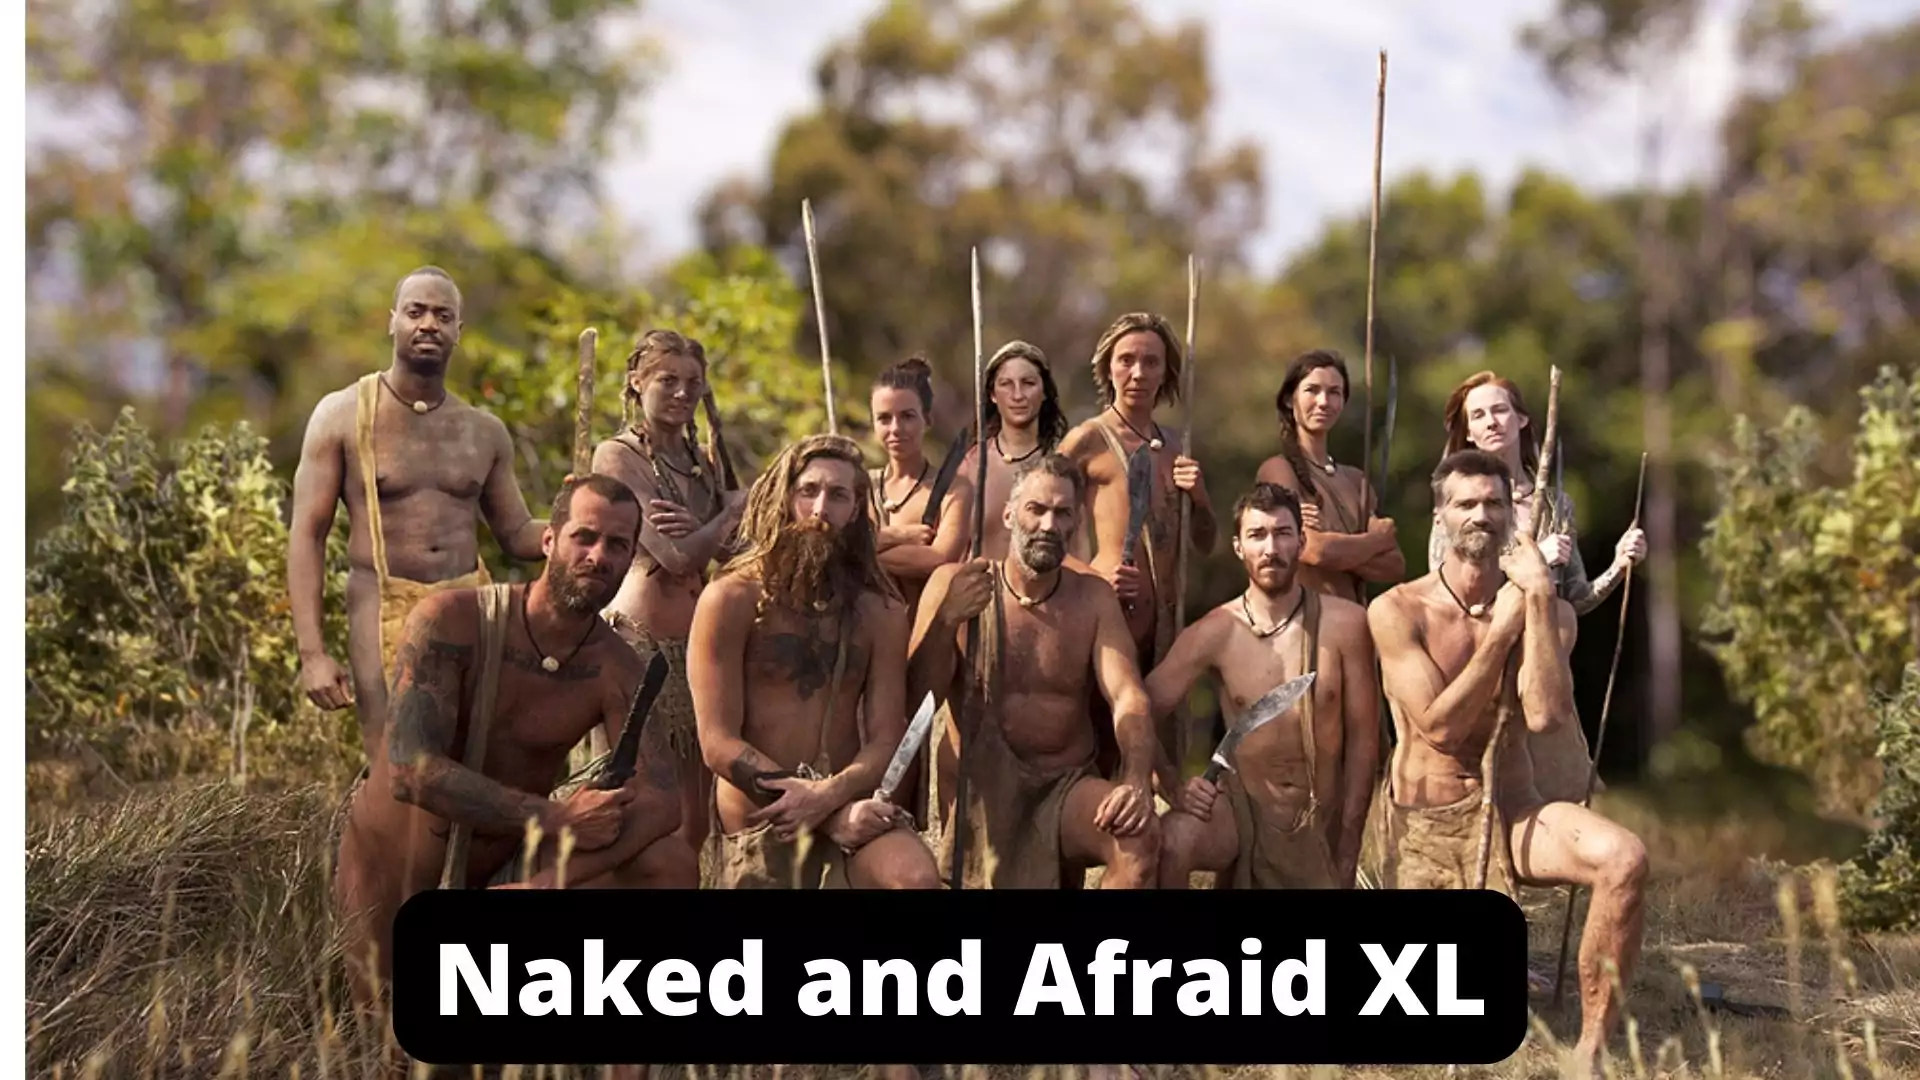 Naked and Afraid XL Parents guide and Age Rating | 2015-